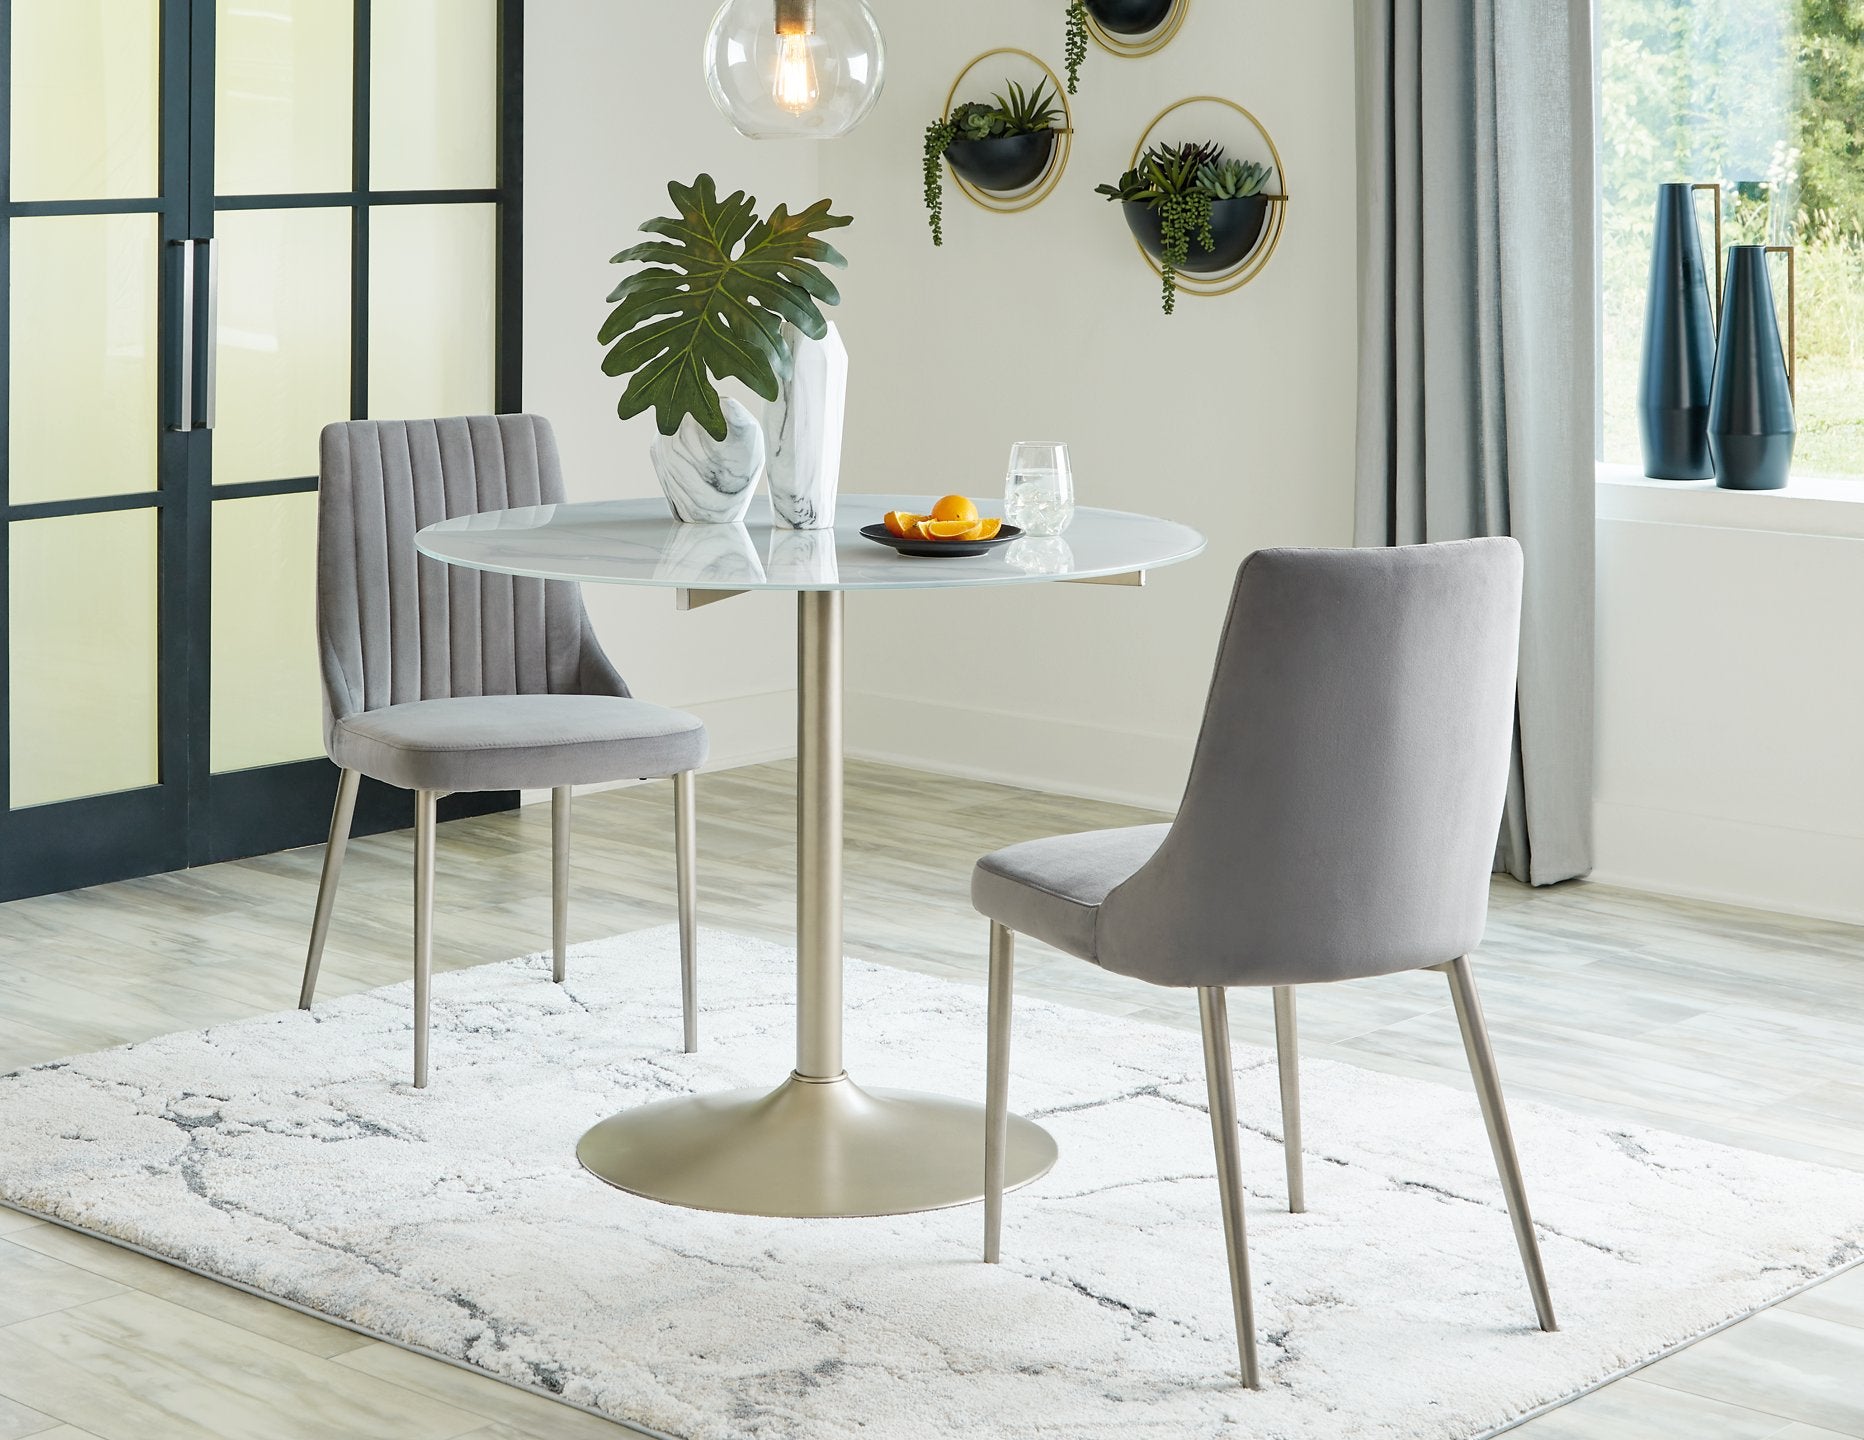 Barchoni 5-Piece Dining Package image